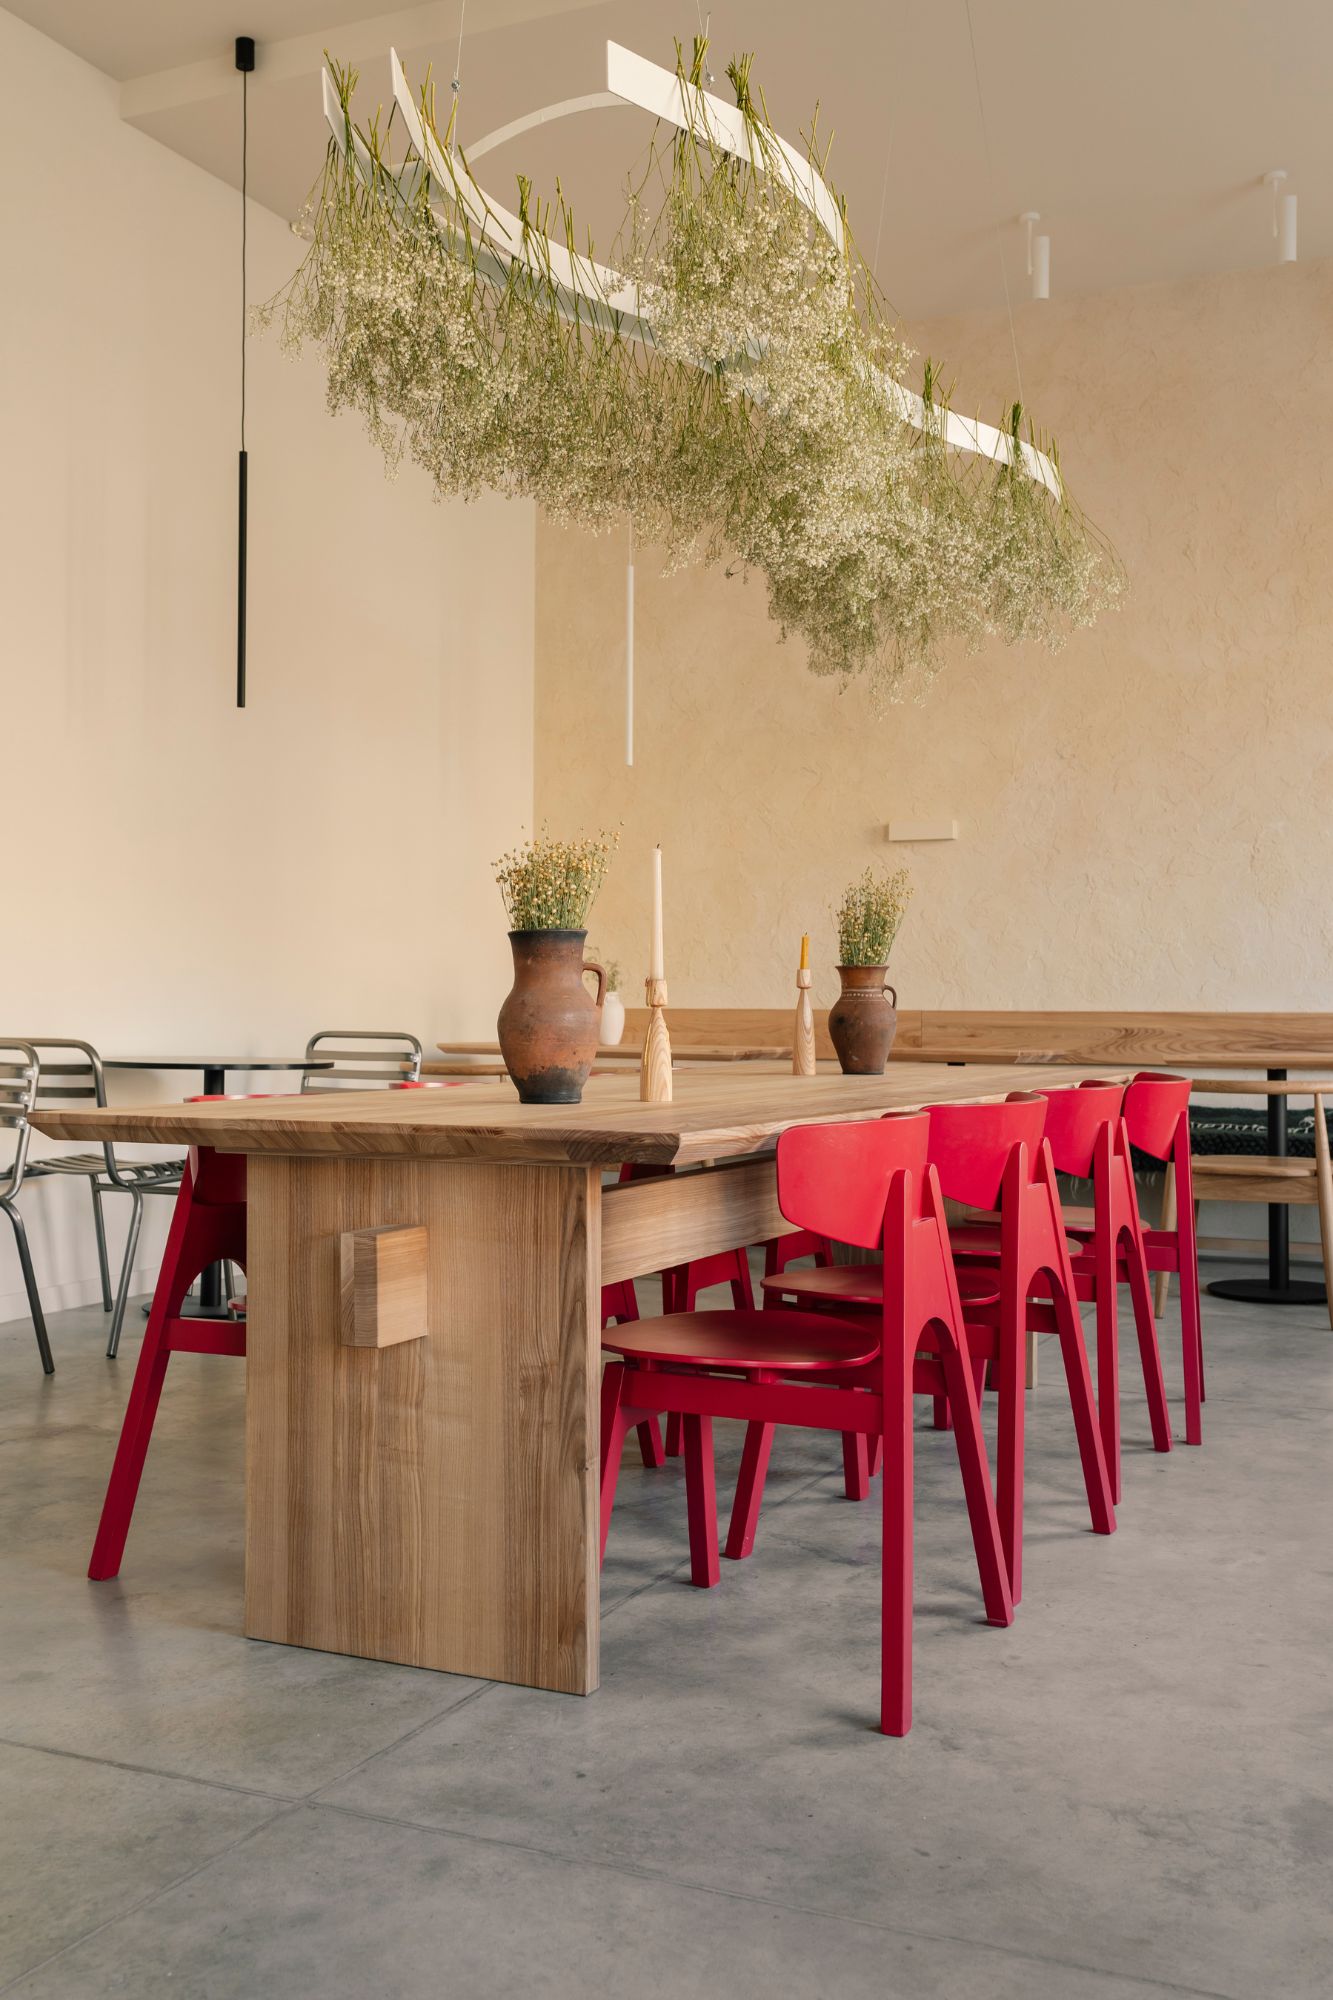 IK-architects, Café and Farm Shop that Cherishes Traditions by IK-architects